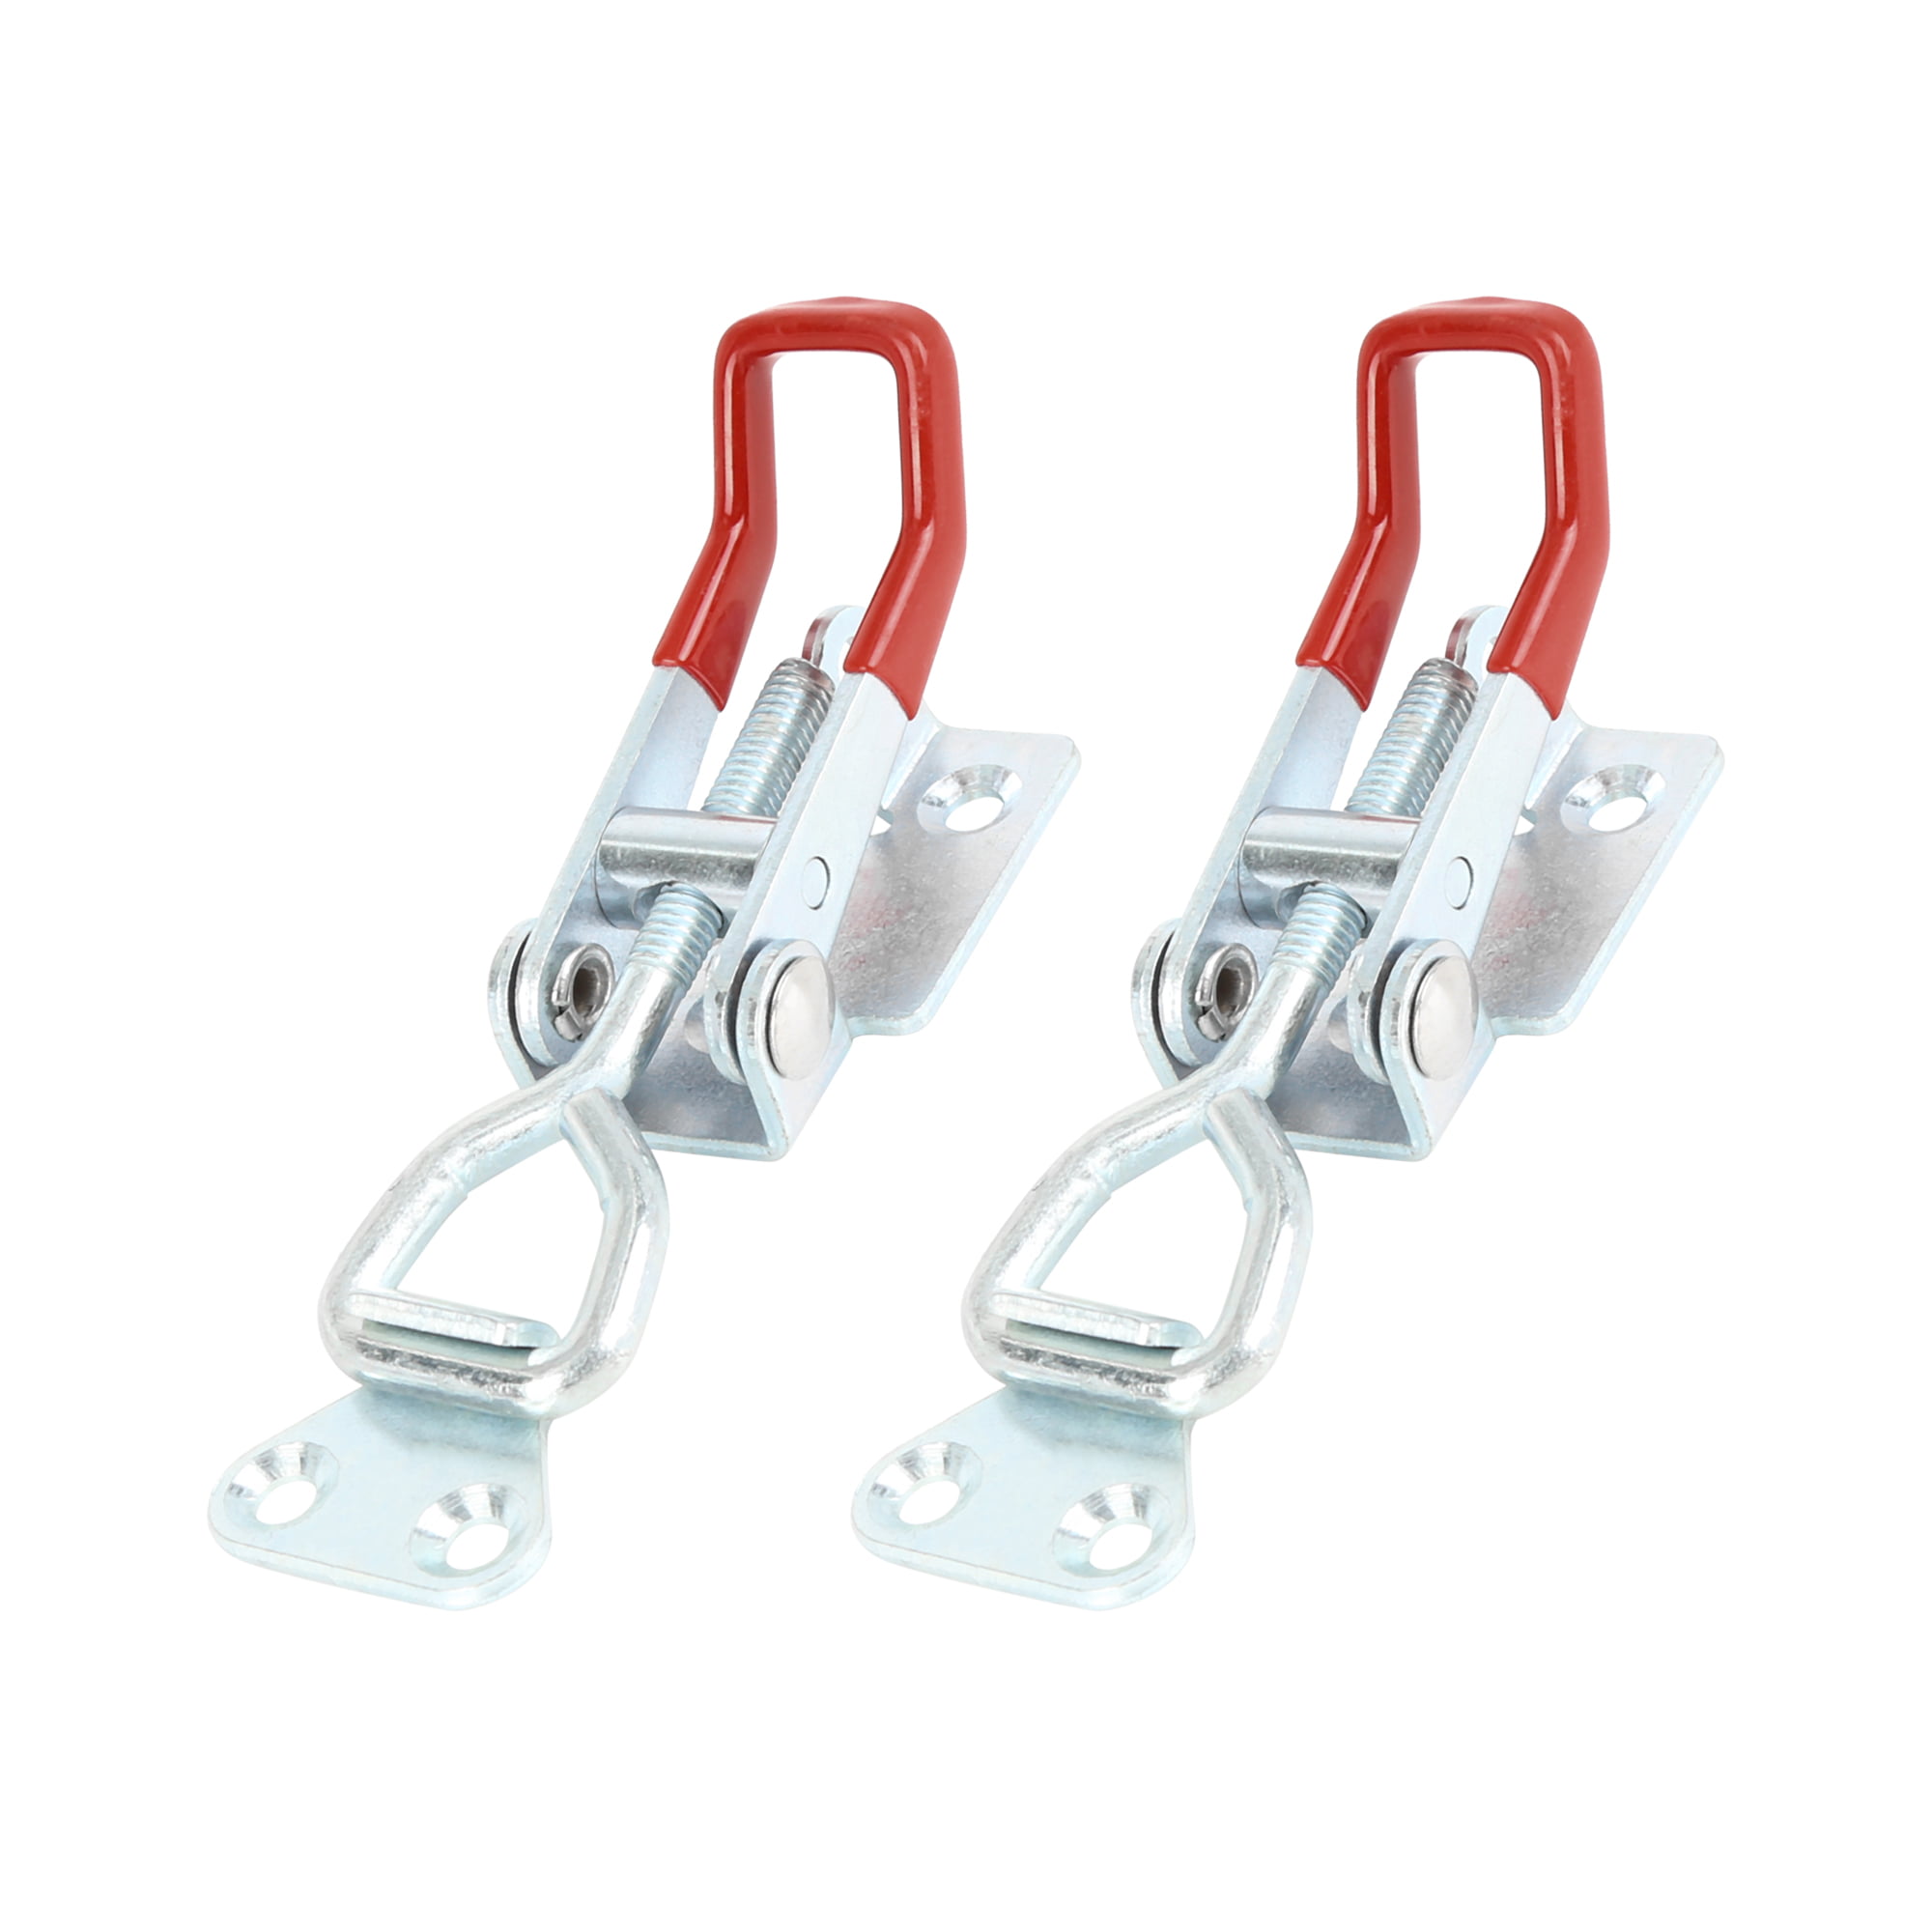 2pcs Car Adjustable Handle Toggle Clamp Latch Hasp with Hole 180Kg ...